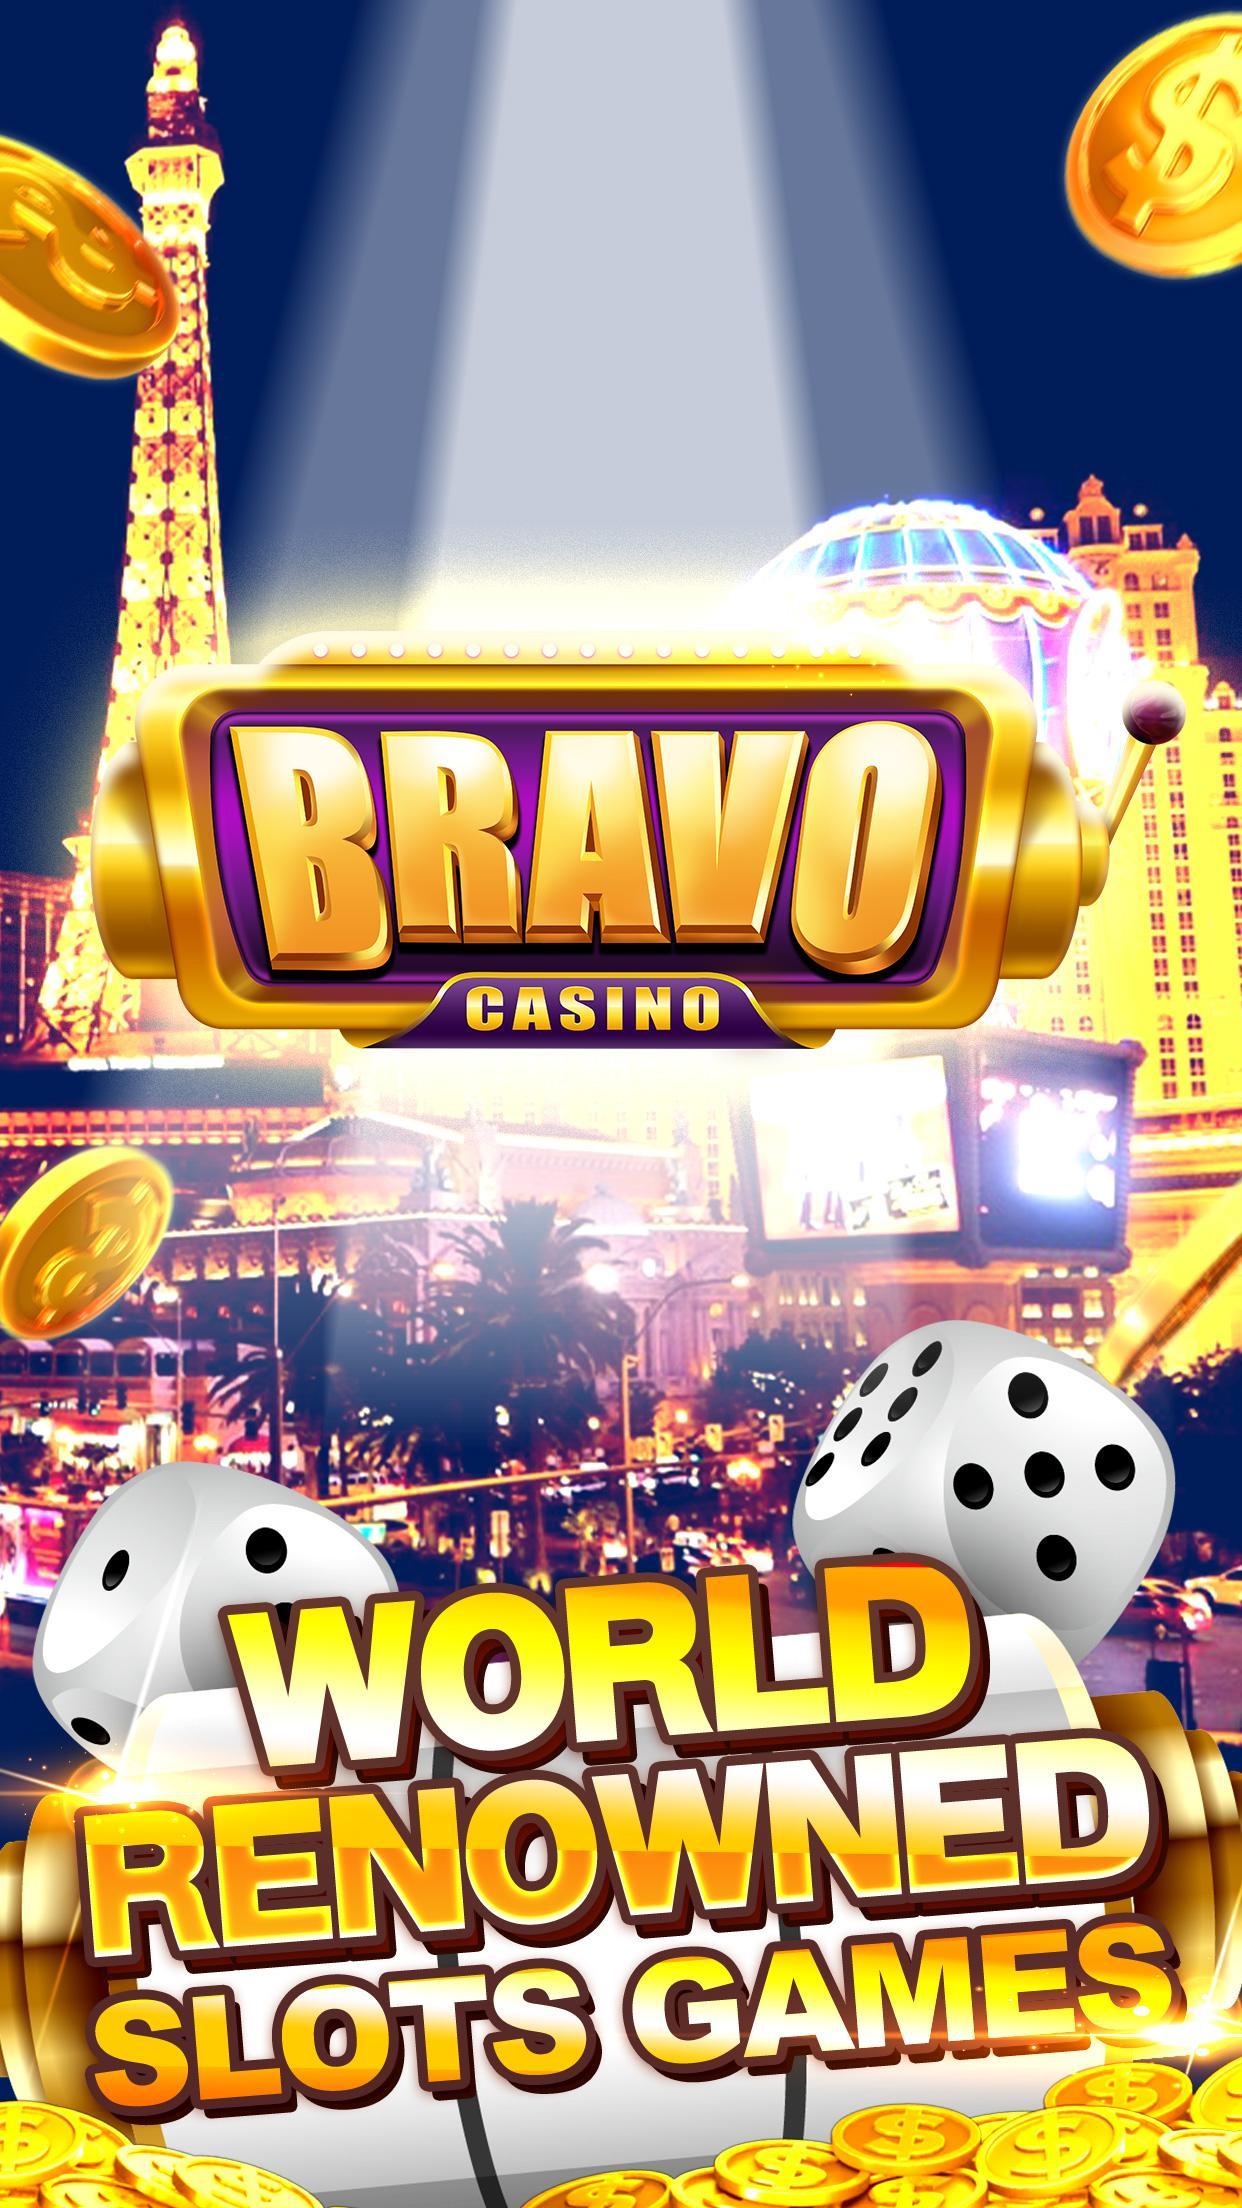 Bravo Casino for Android - APK Download